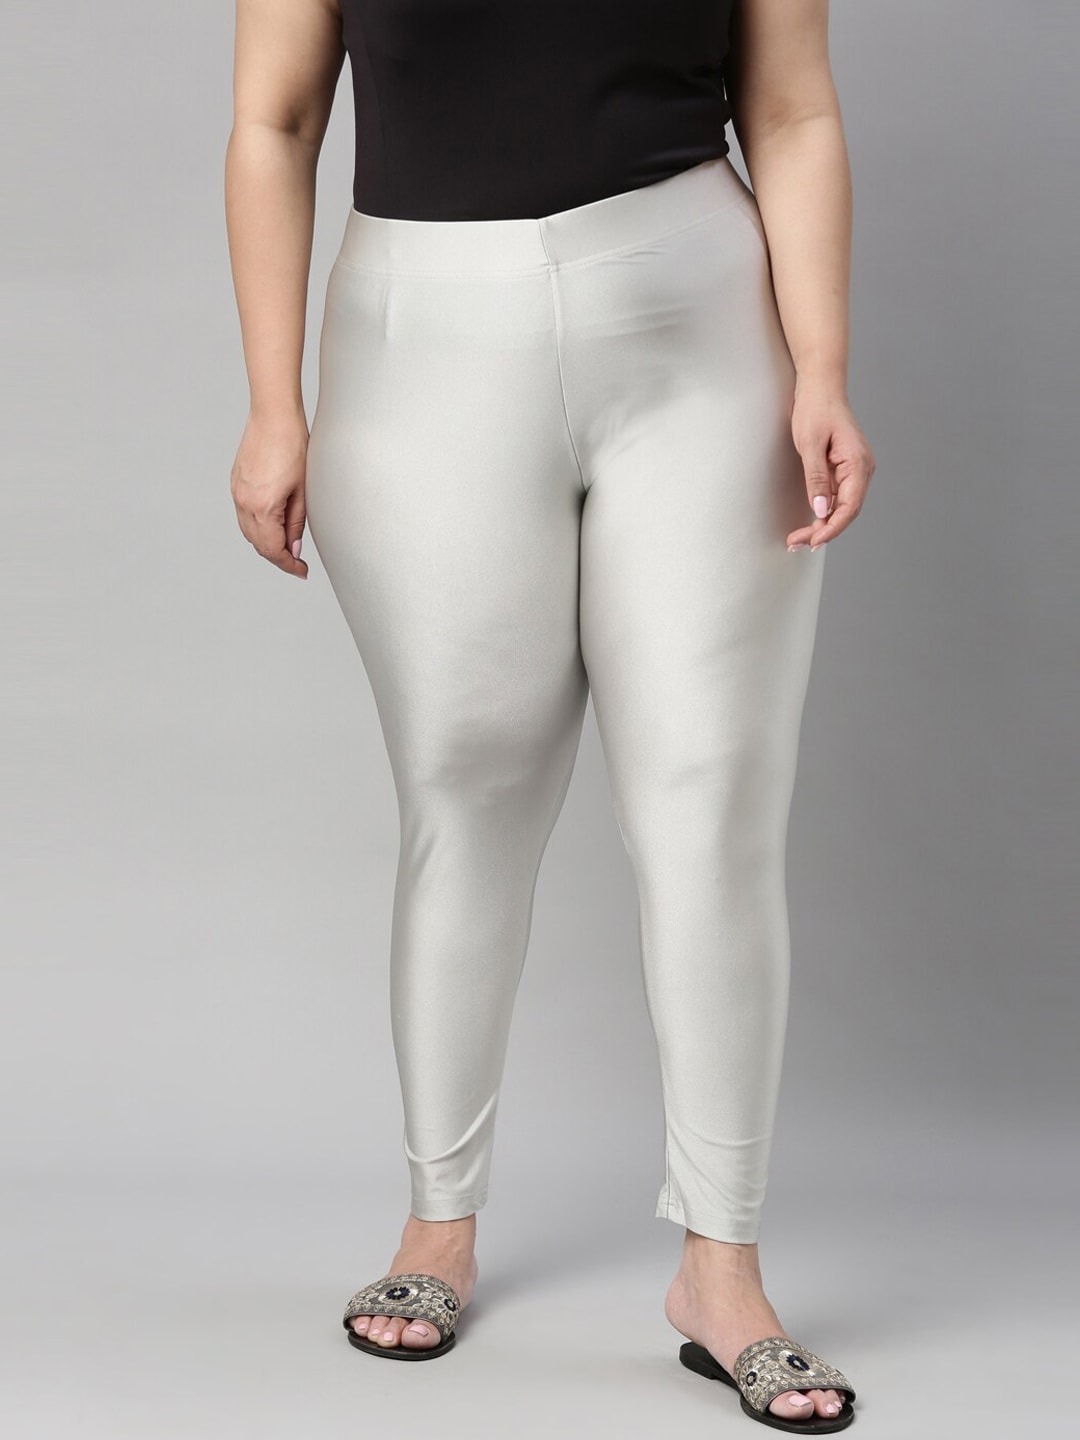 Go Colors Women Silver-Colored Solid Ankle-Length Leggings Price in India